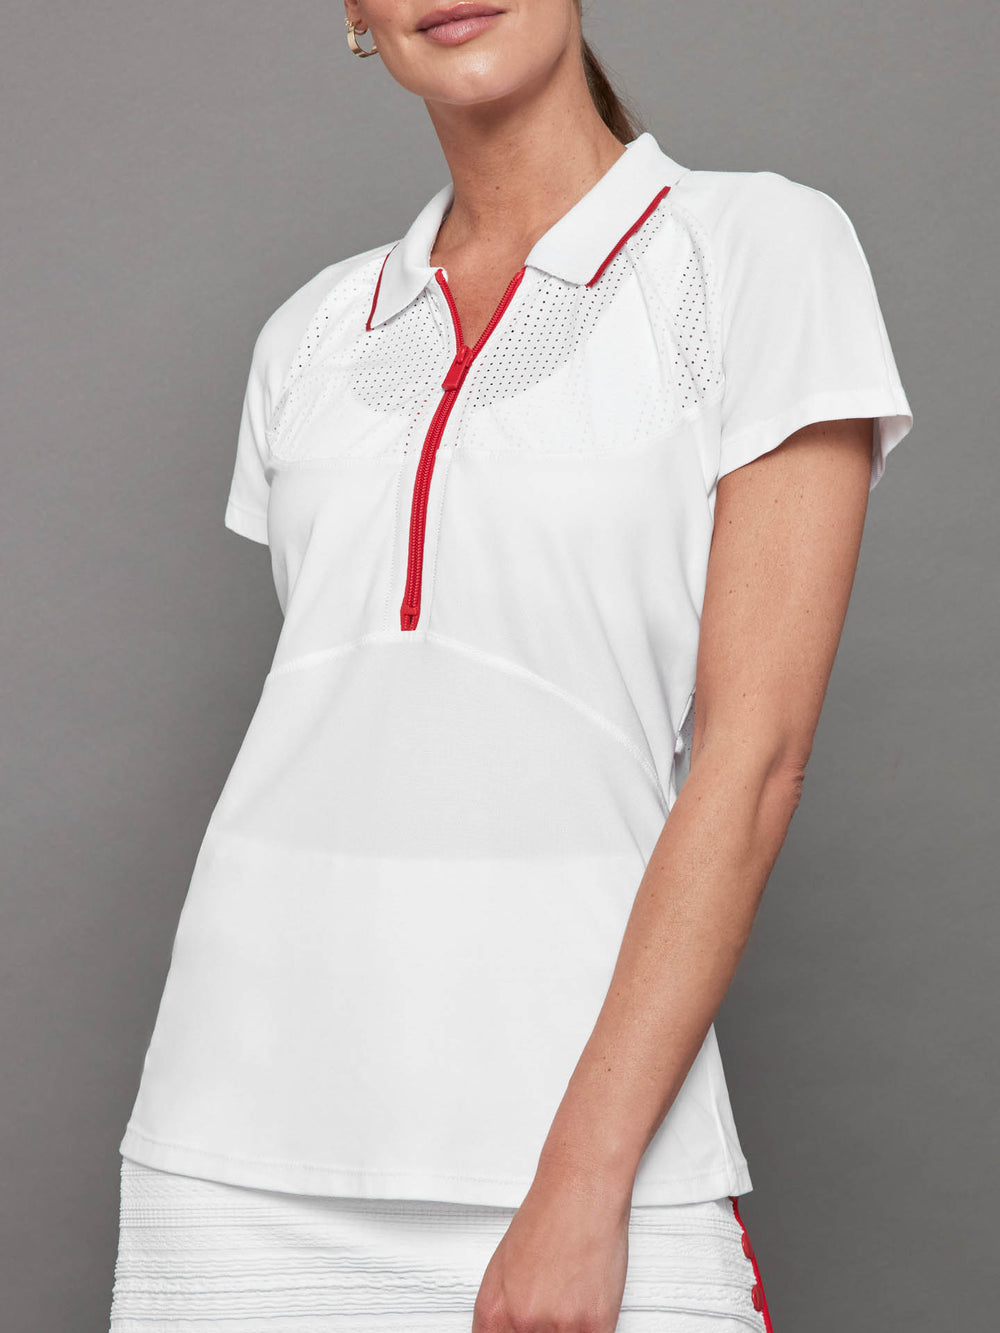 Mesh Zip Performance Polo - White with Red Trim